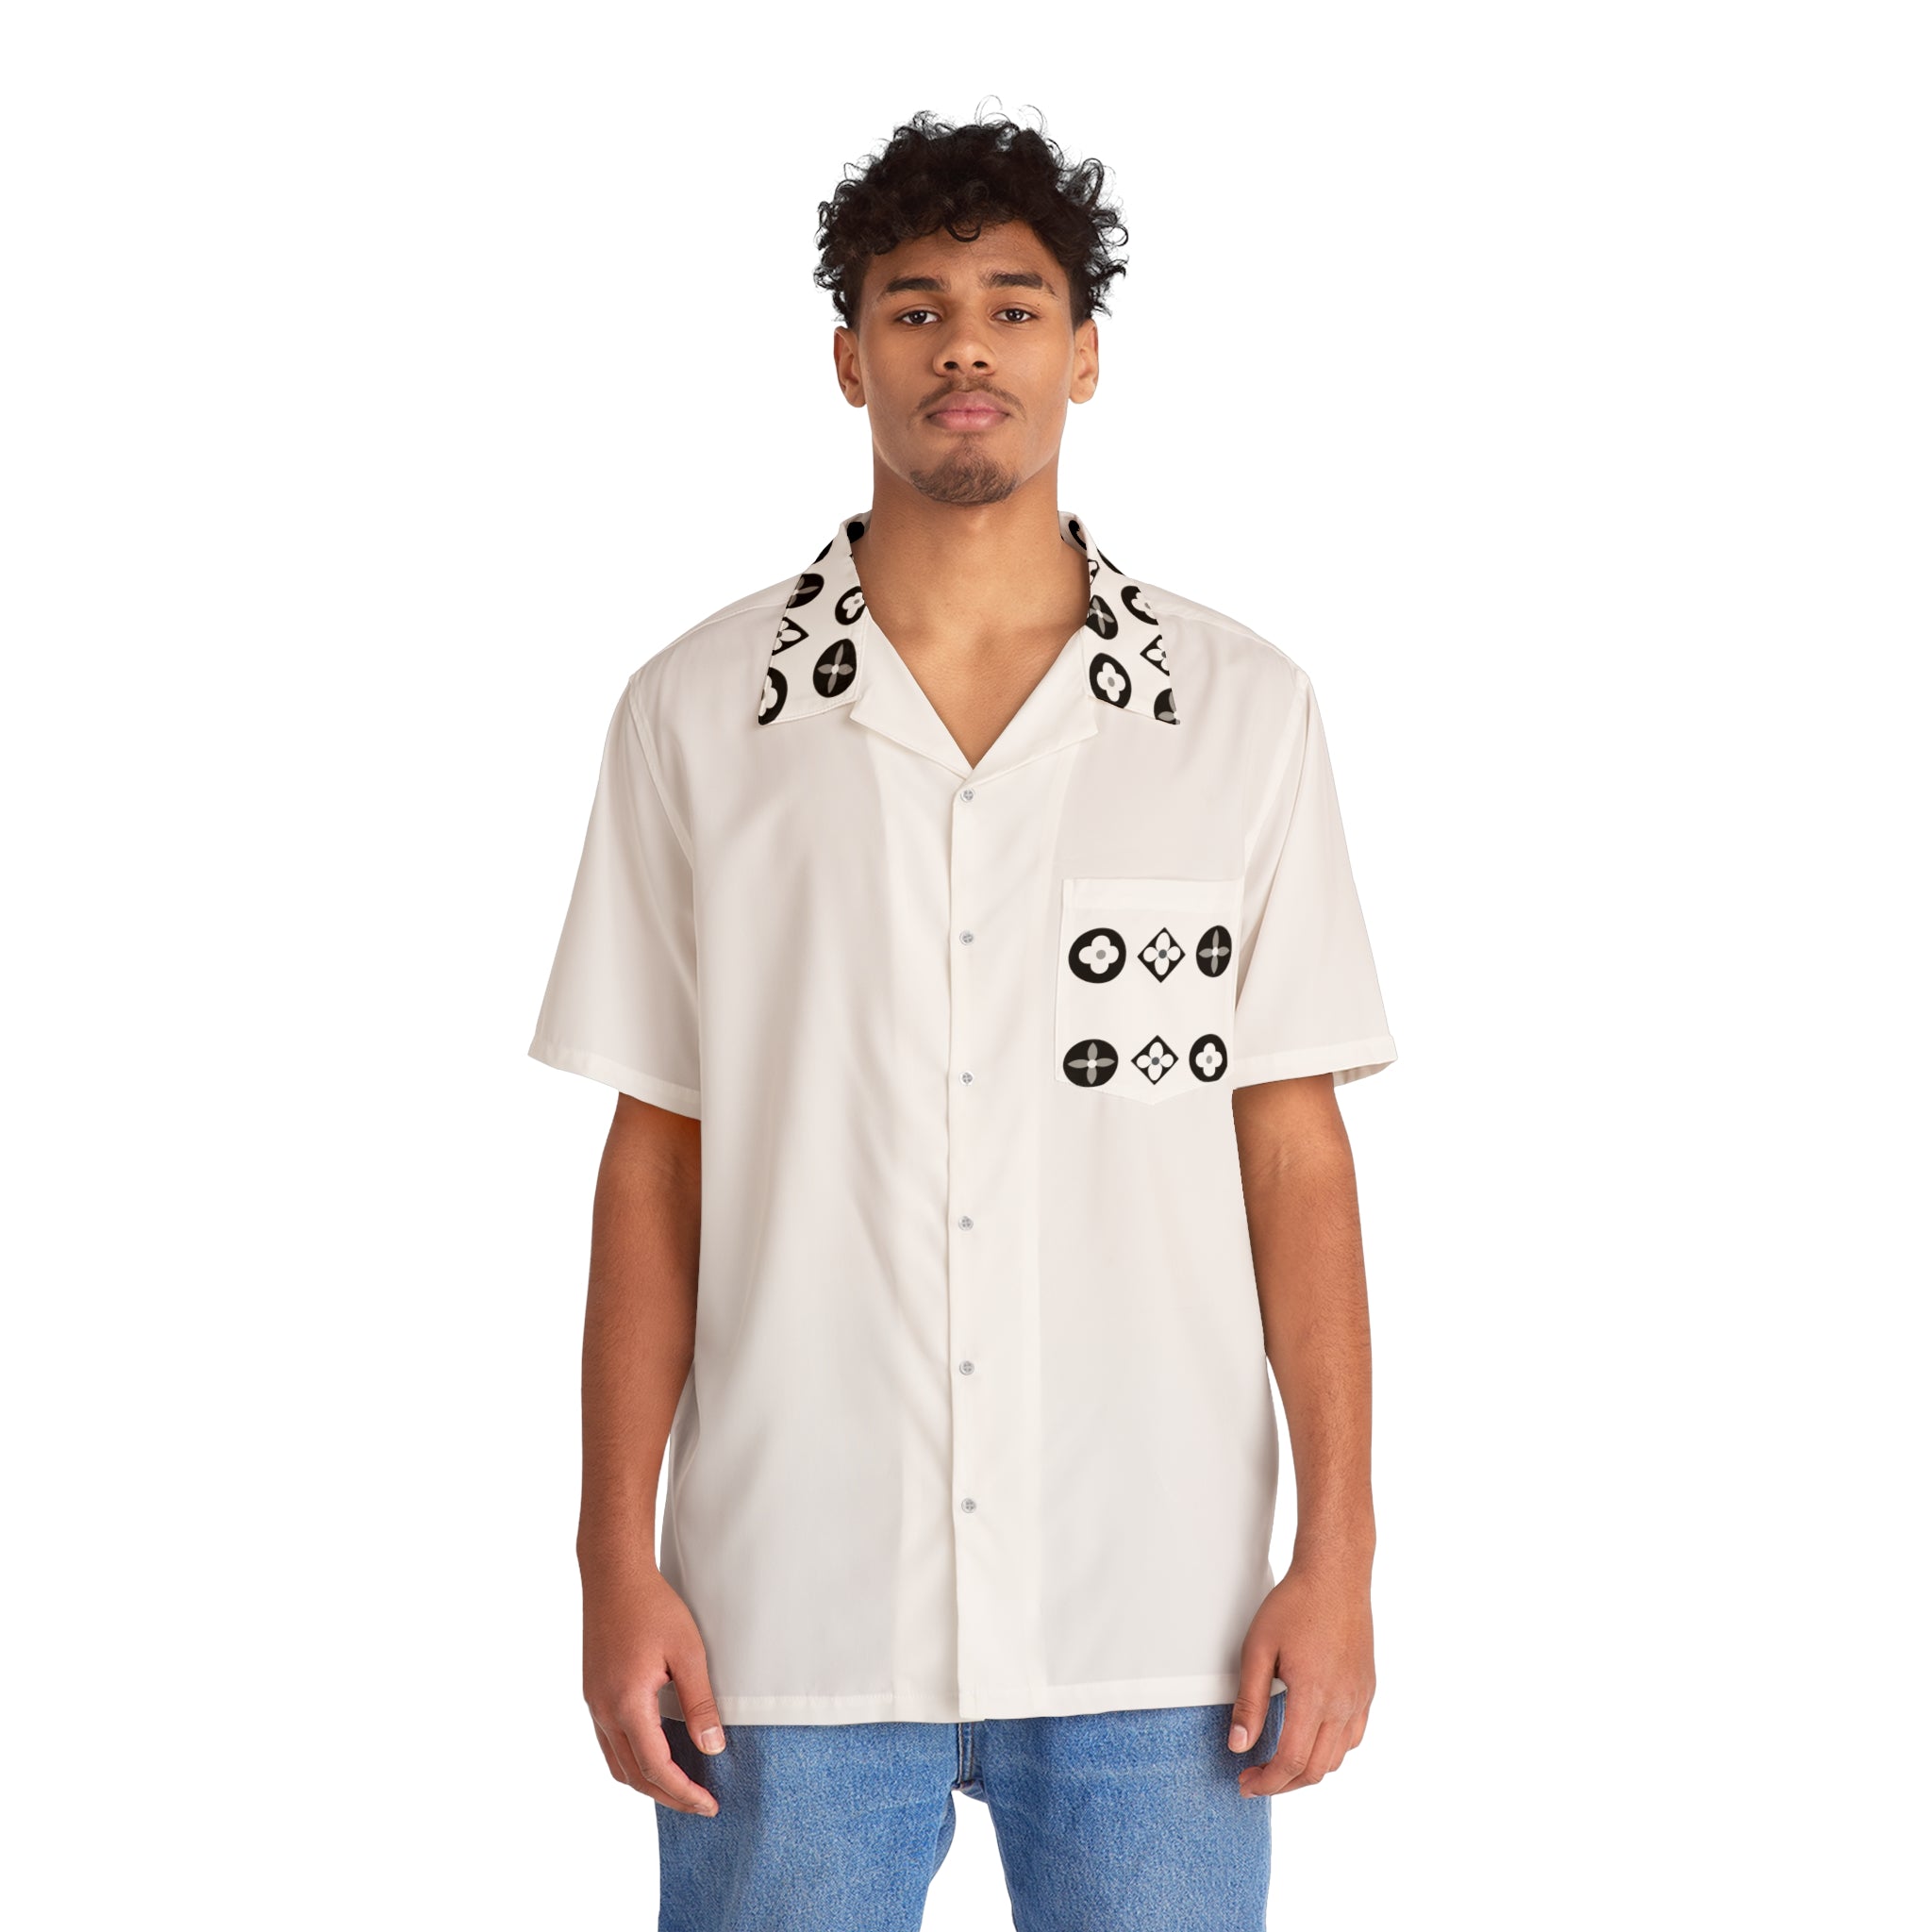 Groove Collection Trilogy of Icons Pocket Grid (Black, White) White Unisex Gender Neutral Button Up Shirt, Hawaiian Shirt